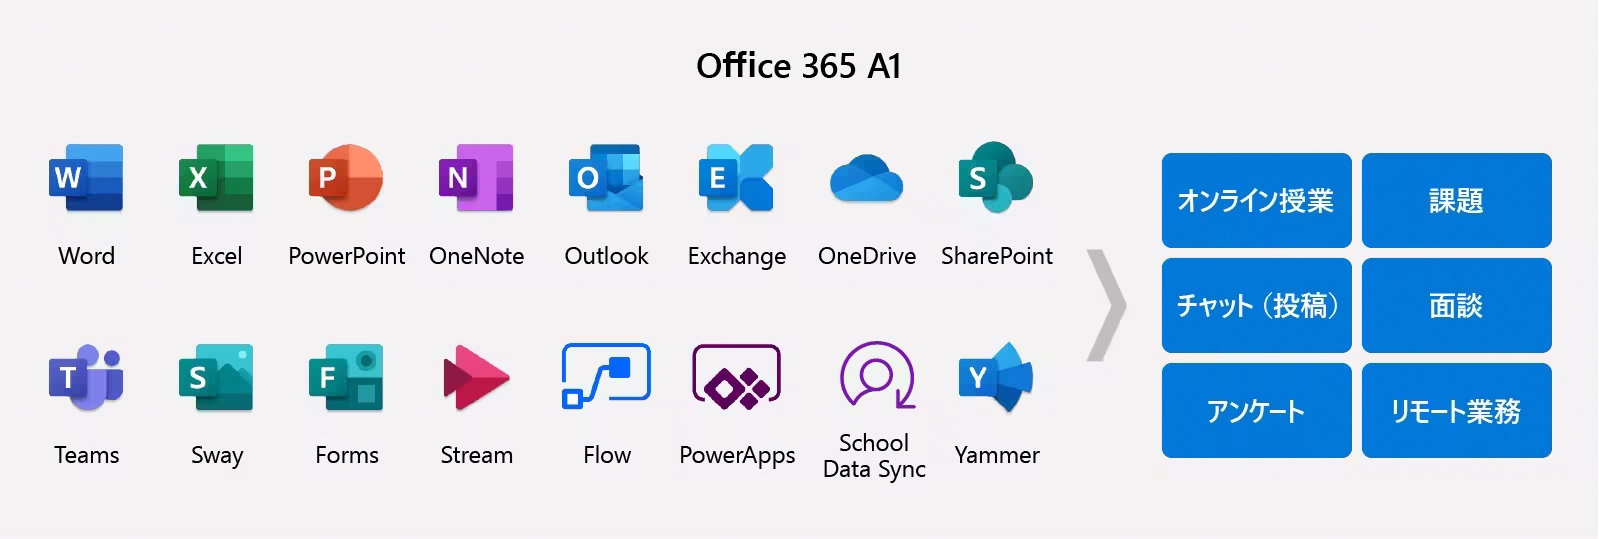 Office 365 A1  Word  Excel  PowerPoint OneNote  Outlook  Exchange  OneDrive SharePoint  Teams  Sway  Forms  Stream  Flow  PowerApps  School Data Sync  Yammer  オンライン授業  課題  チャット(投稿)  面談  アンケート  リモート業務